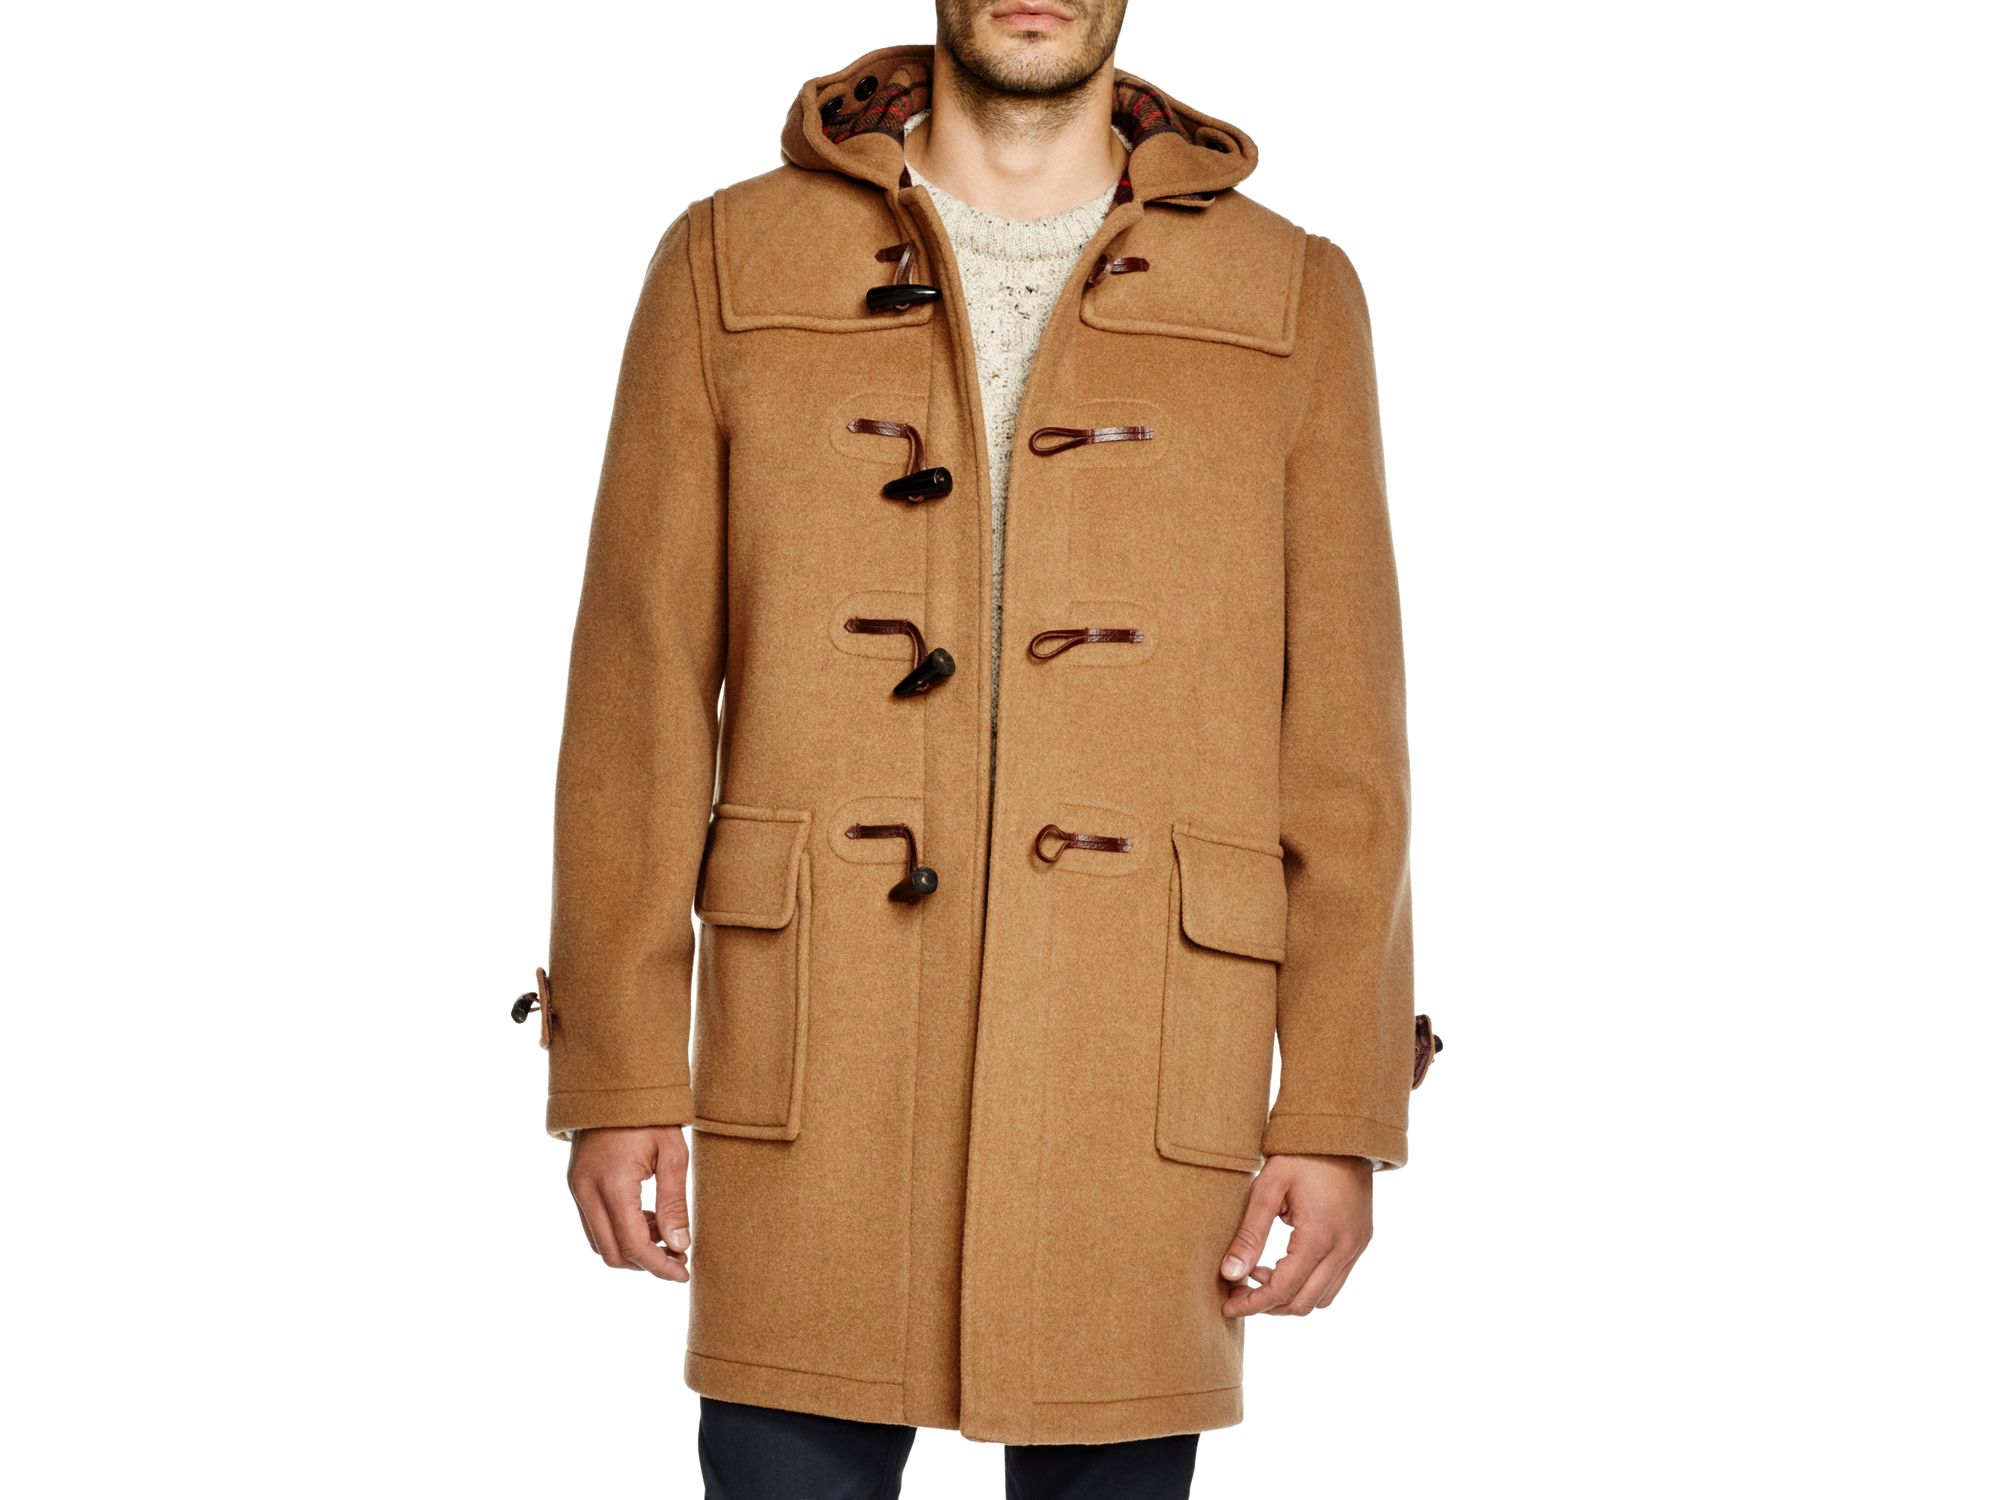 Gloverall Wool Morris Duffle Coat in Camel (Natural) for Men - Lyst